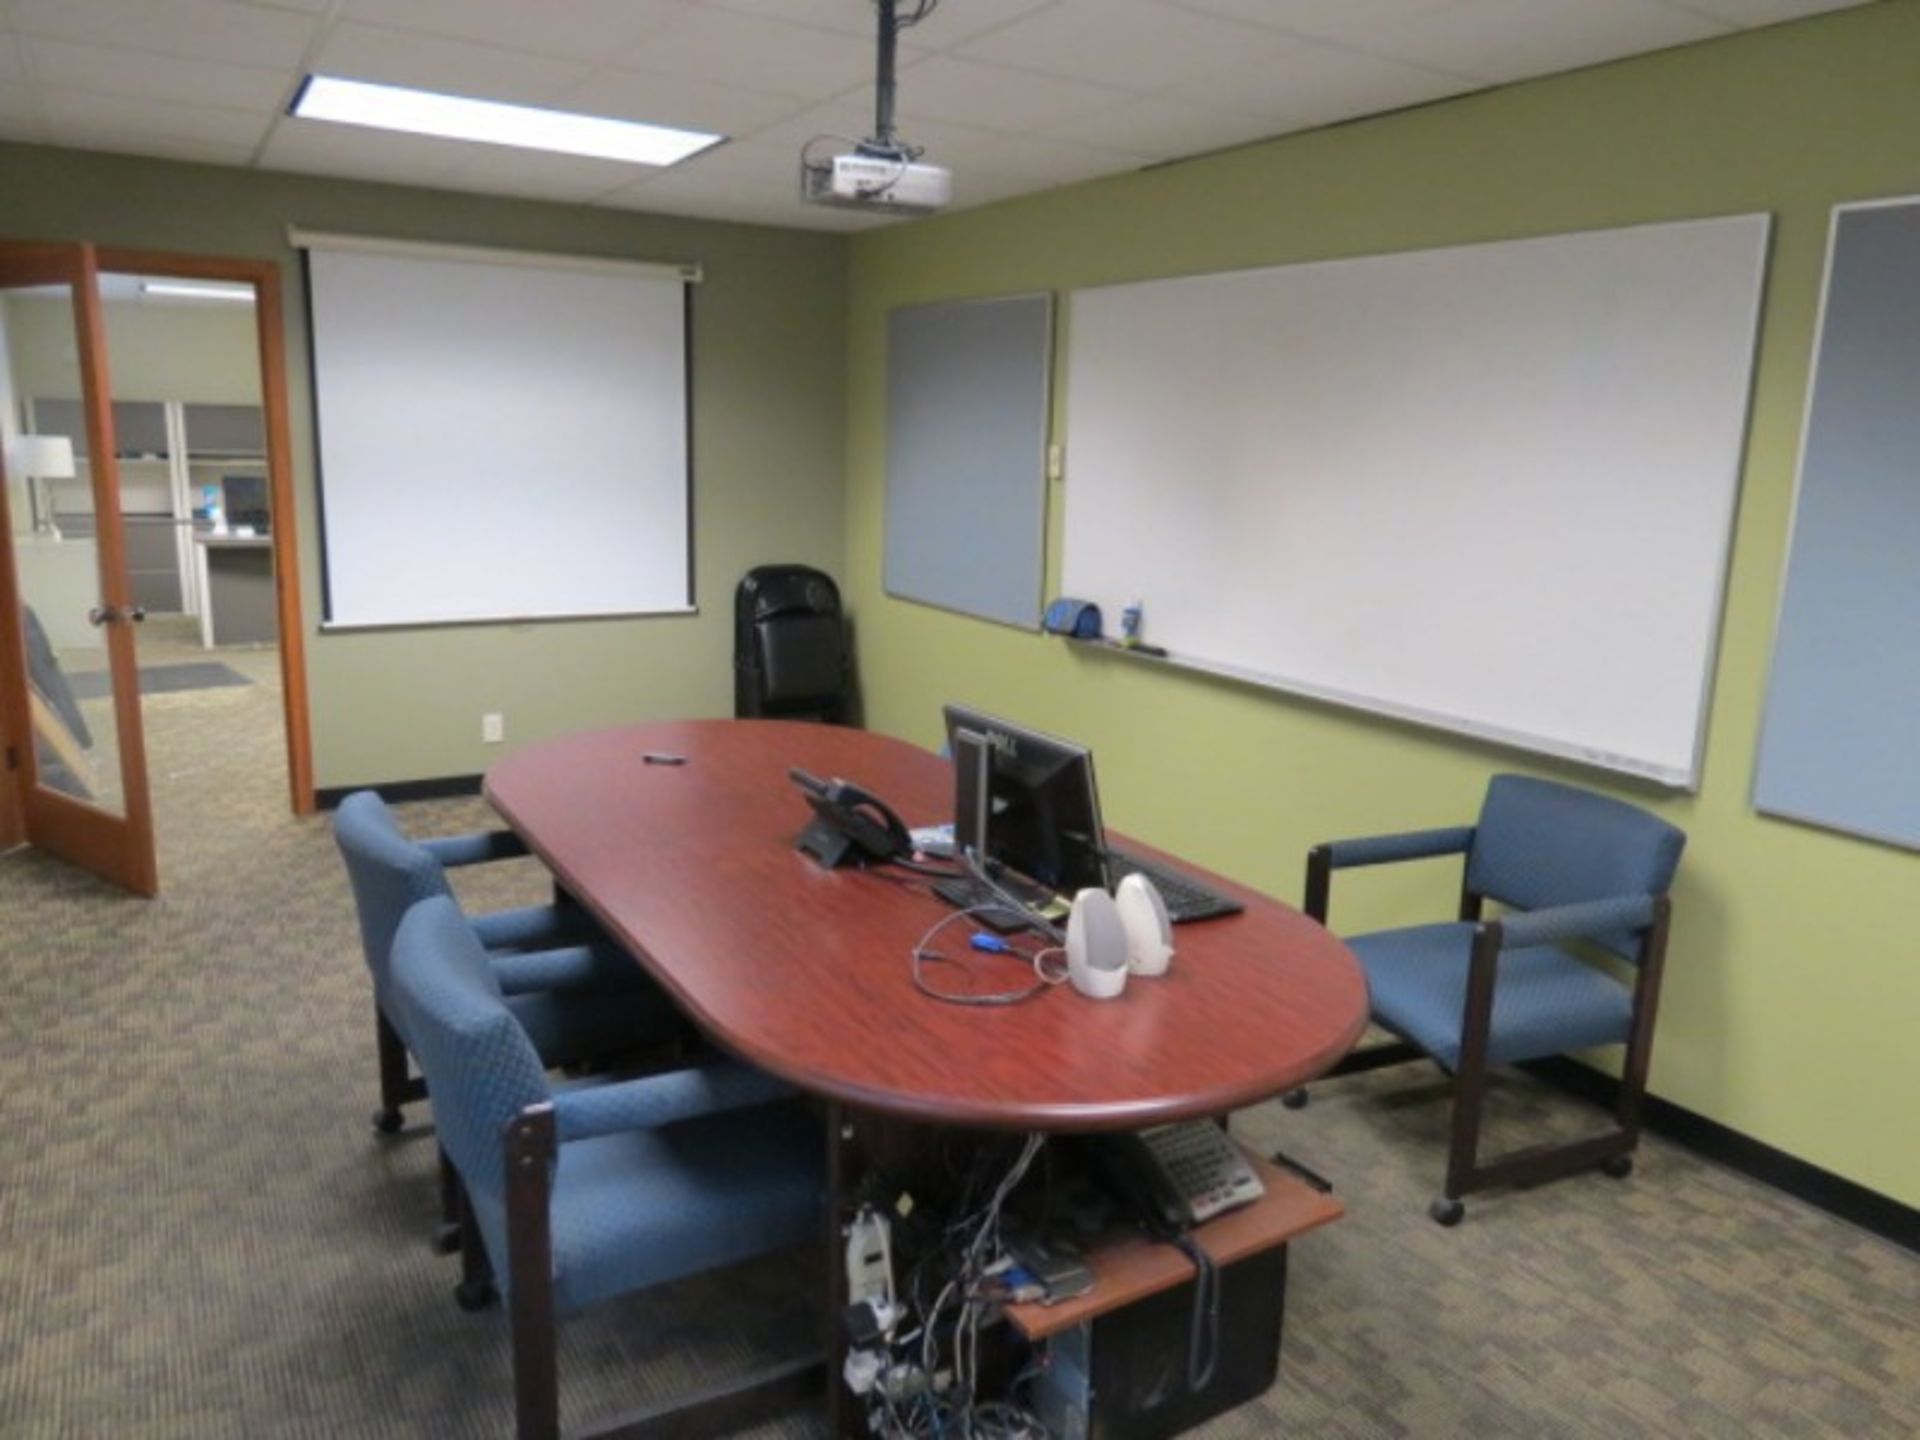 Room Content, Conference Table with Chairs & Projector - Image 3 of 9